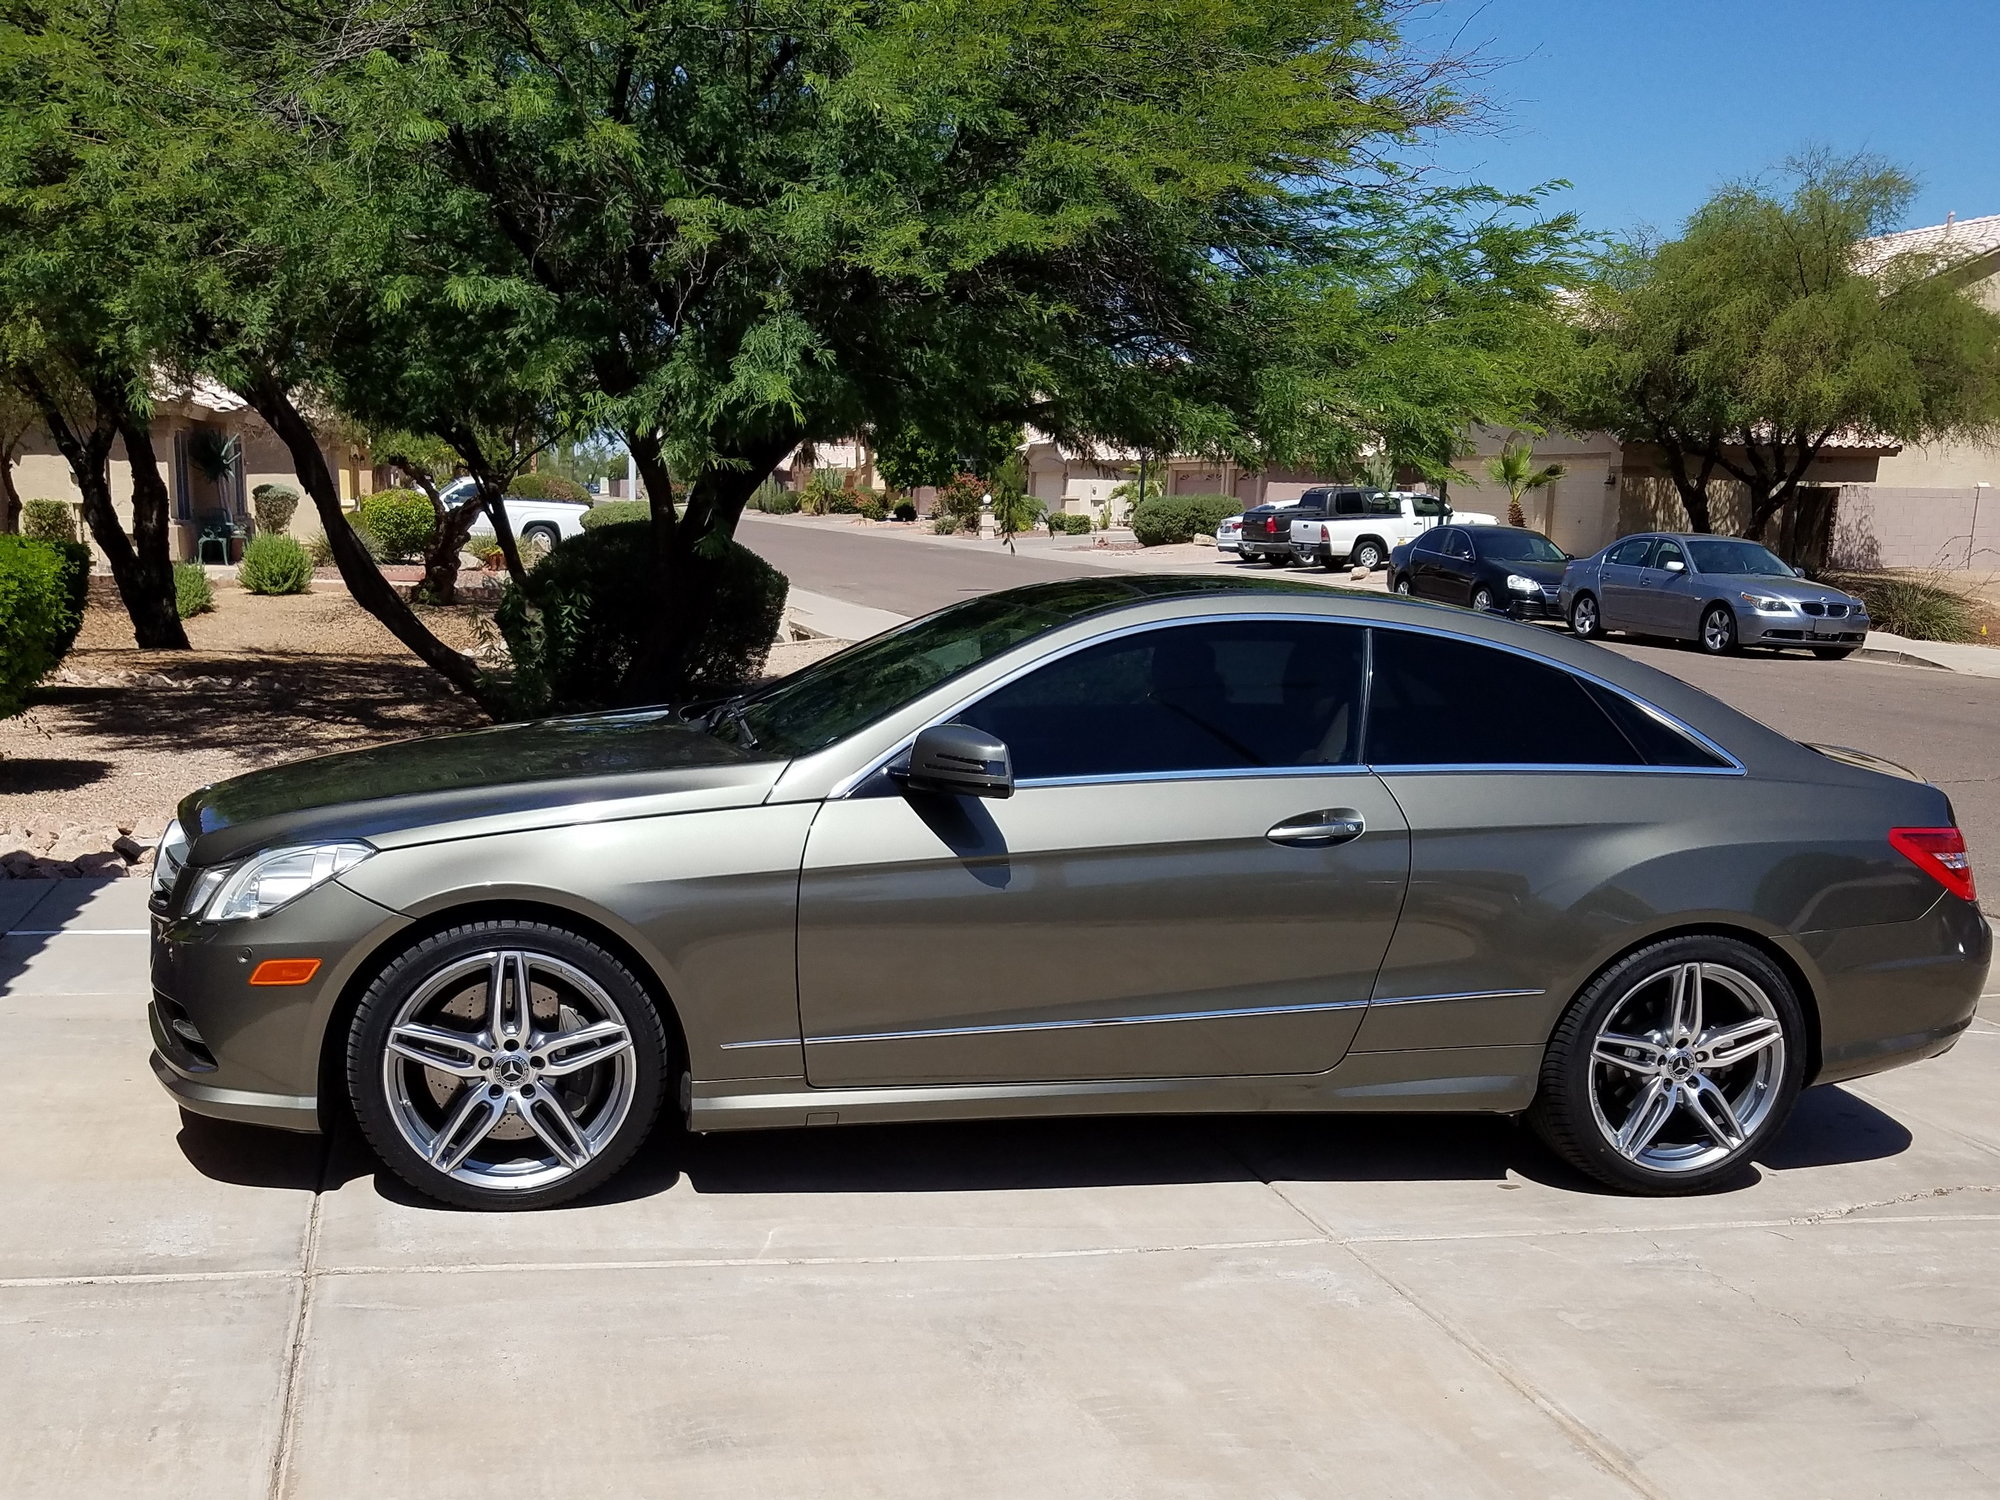 2013 Mercedes-Benz E550 - 2013 E550 Coupe excellent condition - Used - VIN WDDKJ7DBXDF197410 - 68,800 Miles - 8 cyl - 2WD - Automatic - Coupe - Gray - Chandler, AZ 85224, United States